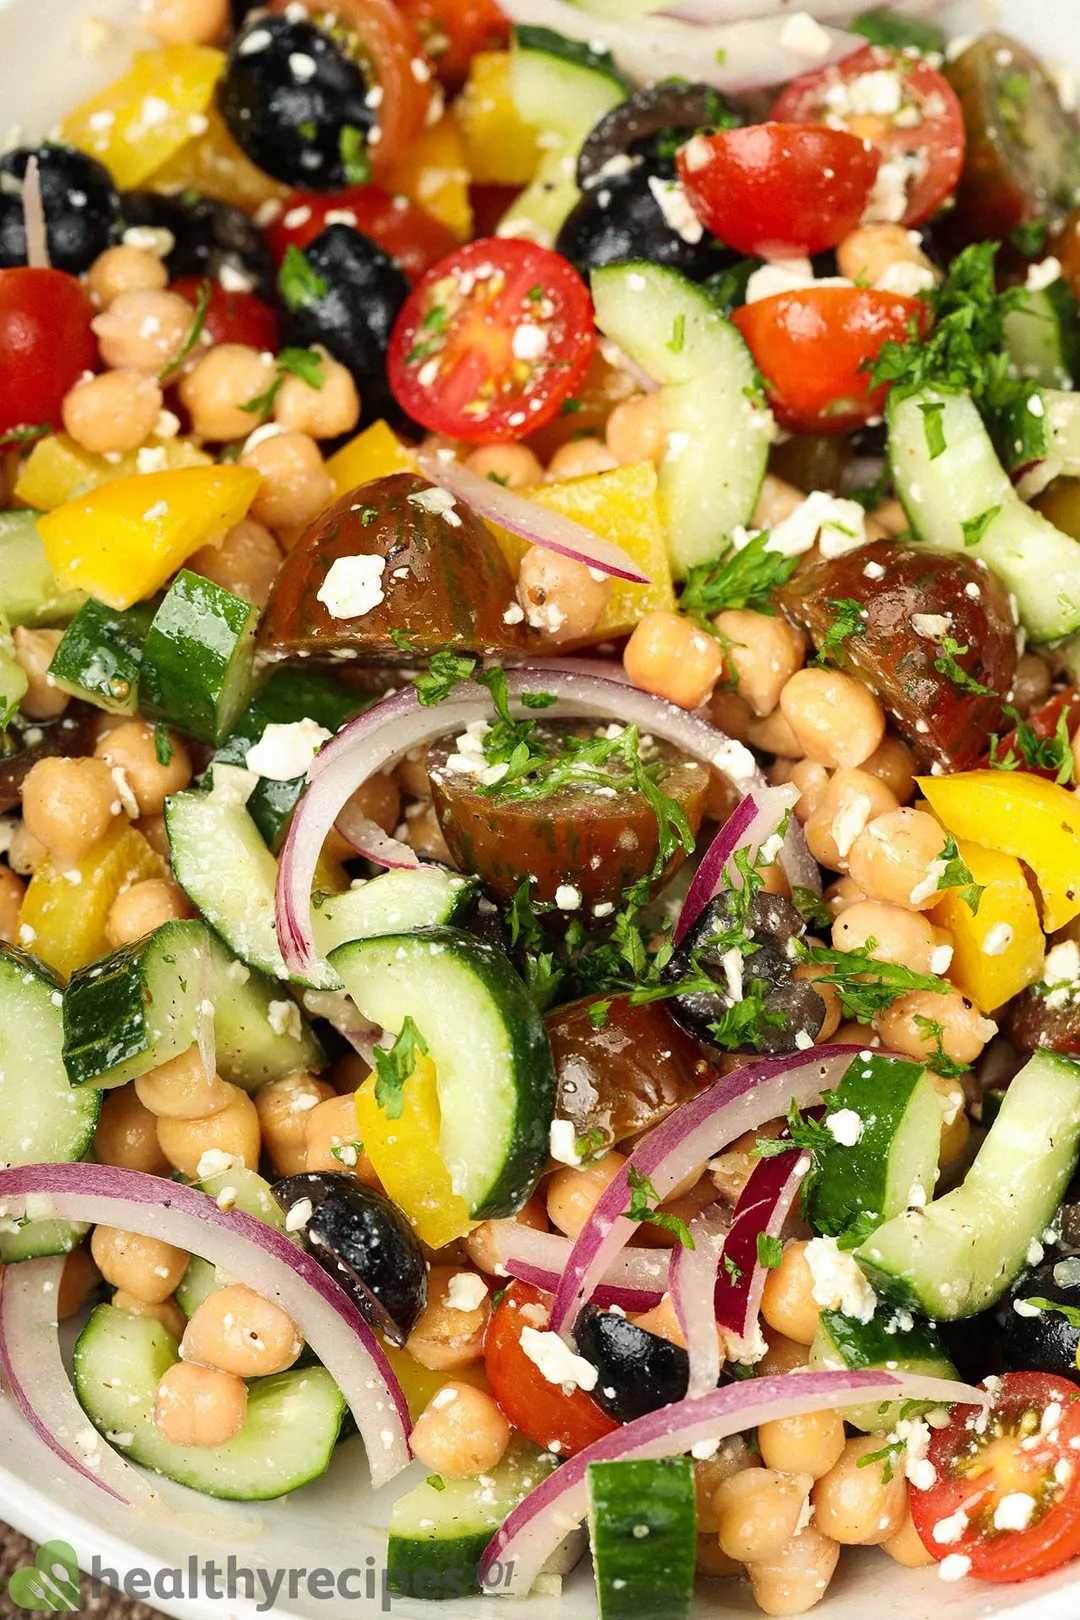 A close-up shot of a Greek chickpea salad, showcasing pieces of red onion, chickpeas, cherry tomatoes, yellow bell peppers, and black olives.